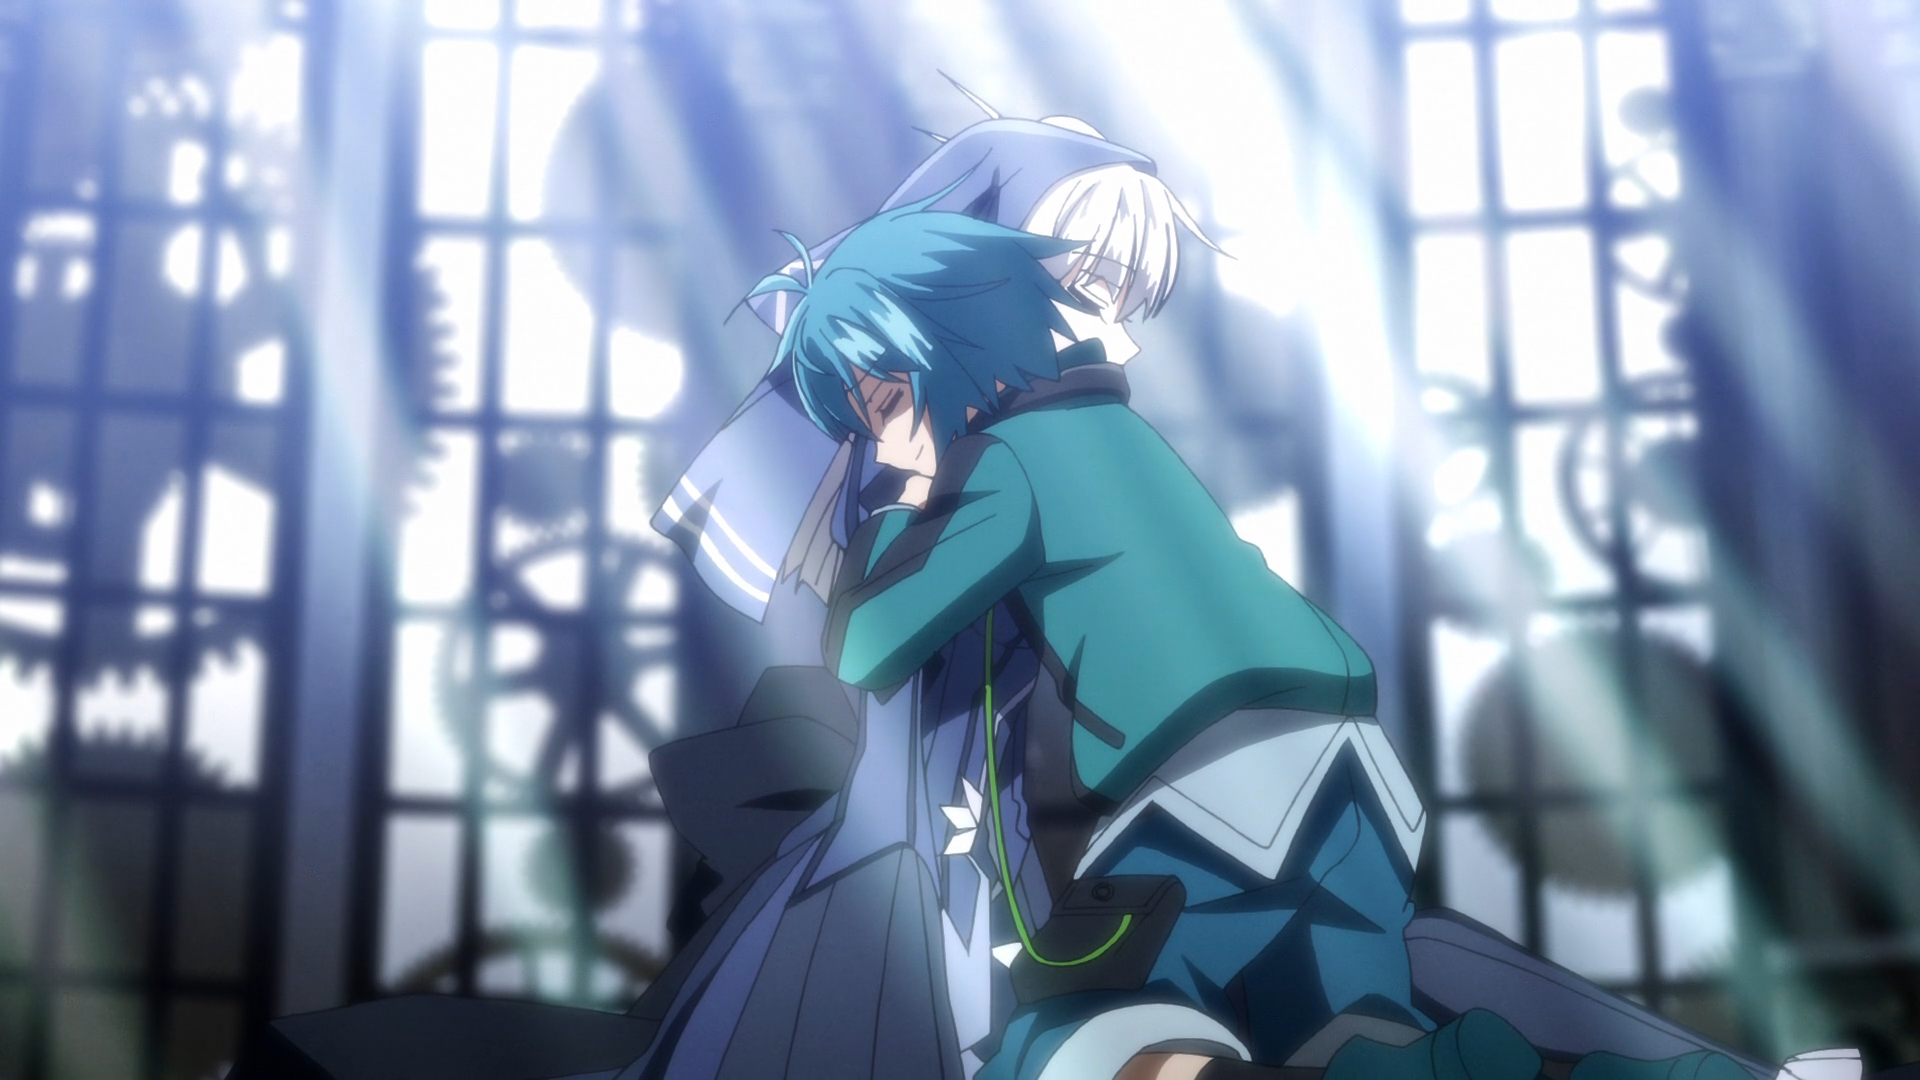 Review/discussion about: Clockwork Planet